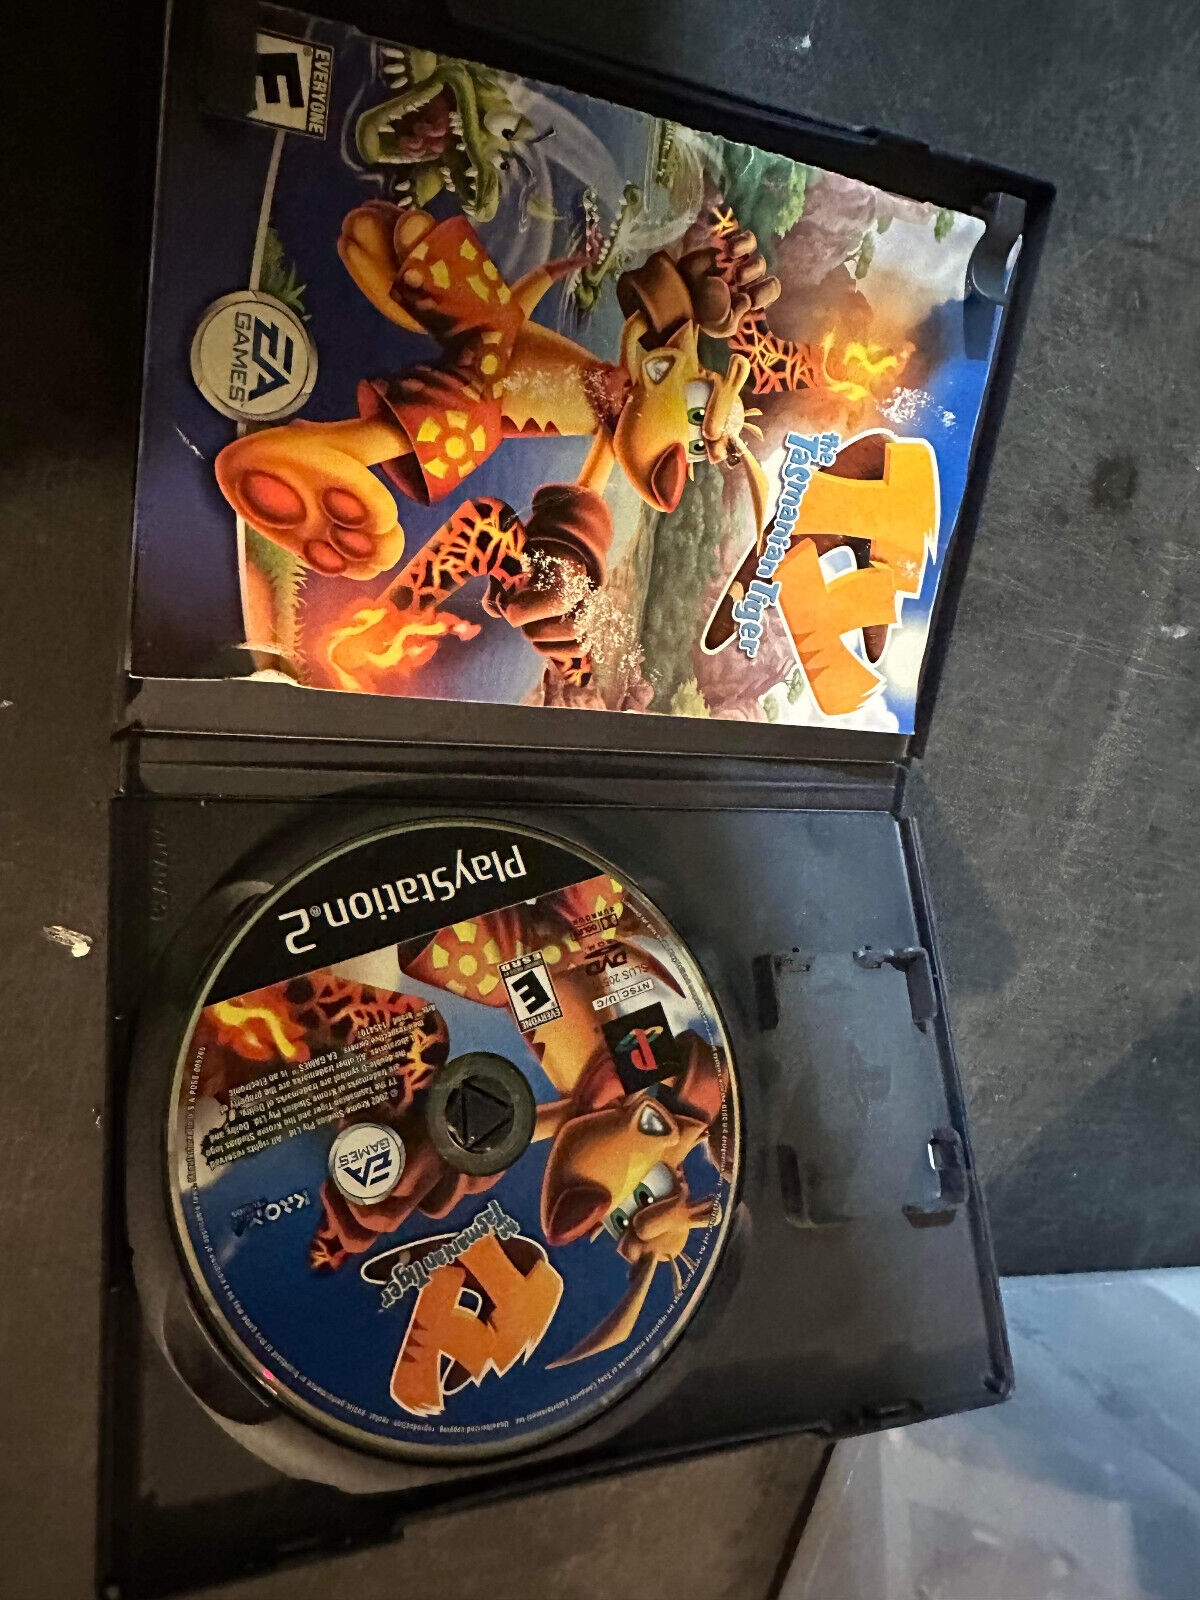 Ty the Tasmanian Tiger (Sony PlayStation 2) - Tested